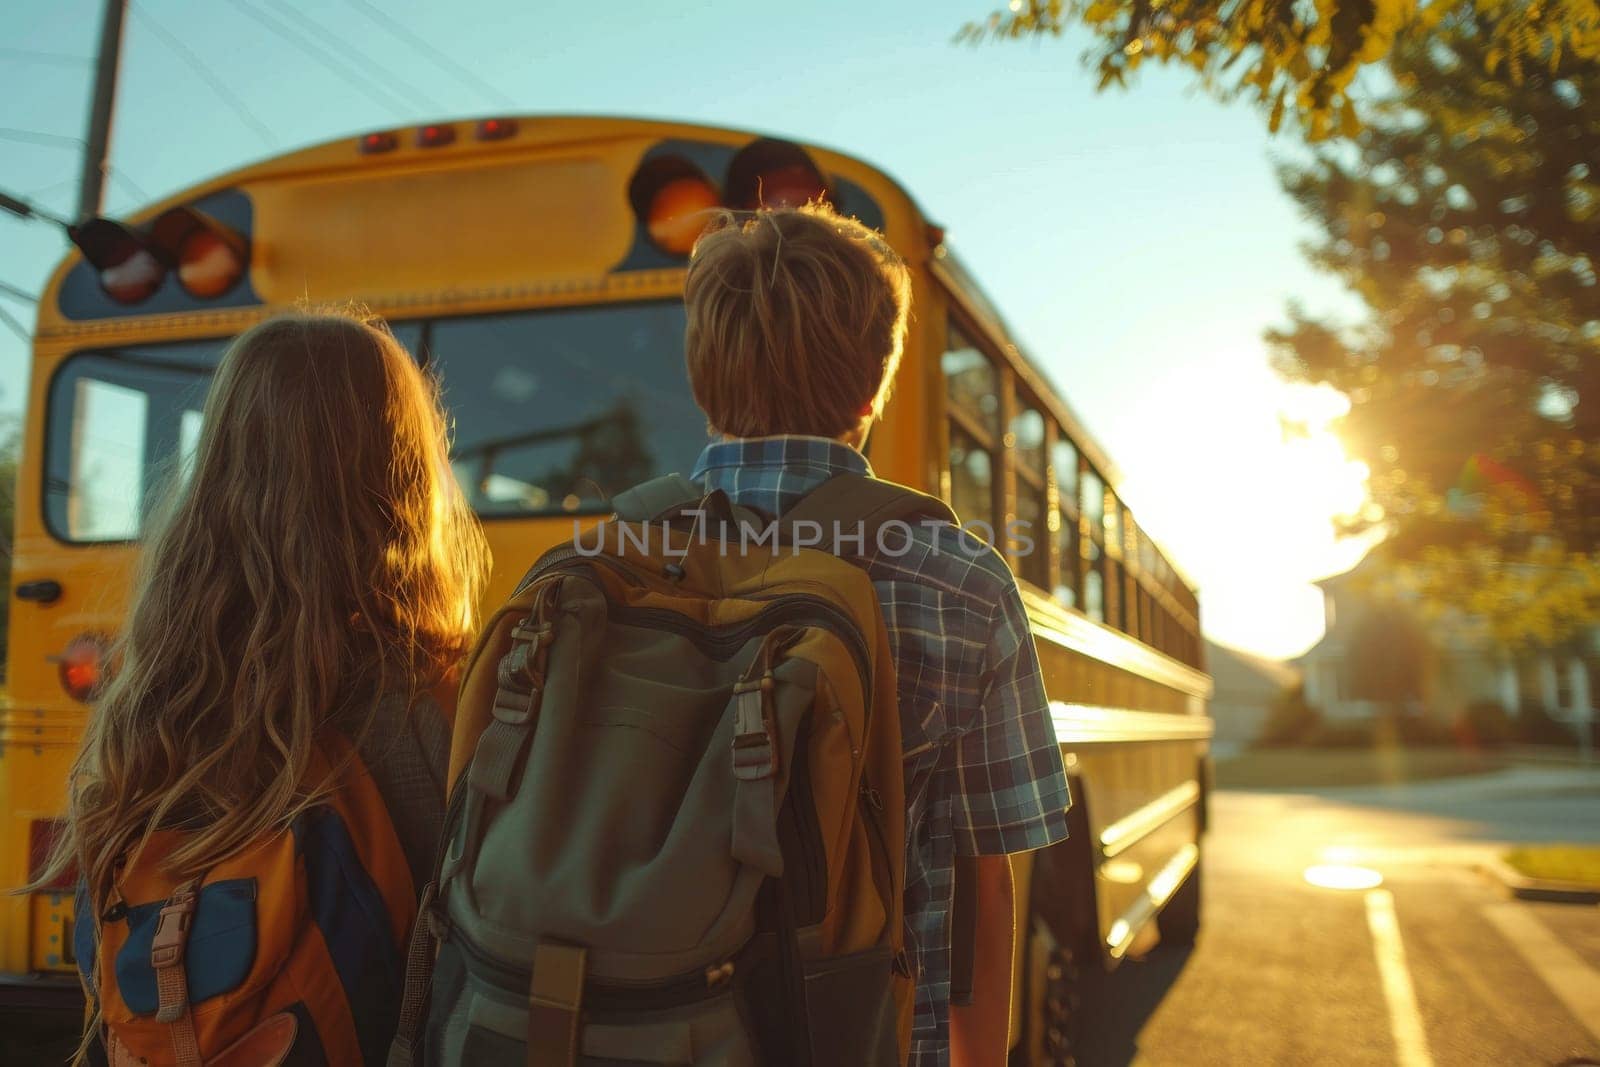 A group of children are standing in front of a yellow school bus. The sun is shining brightly, creating a warm and inviting atmosphere. The children are wearing backpacks